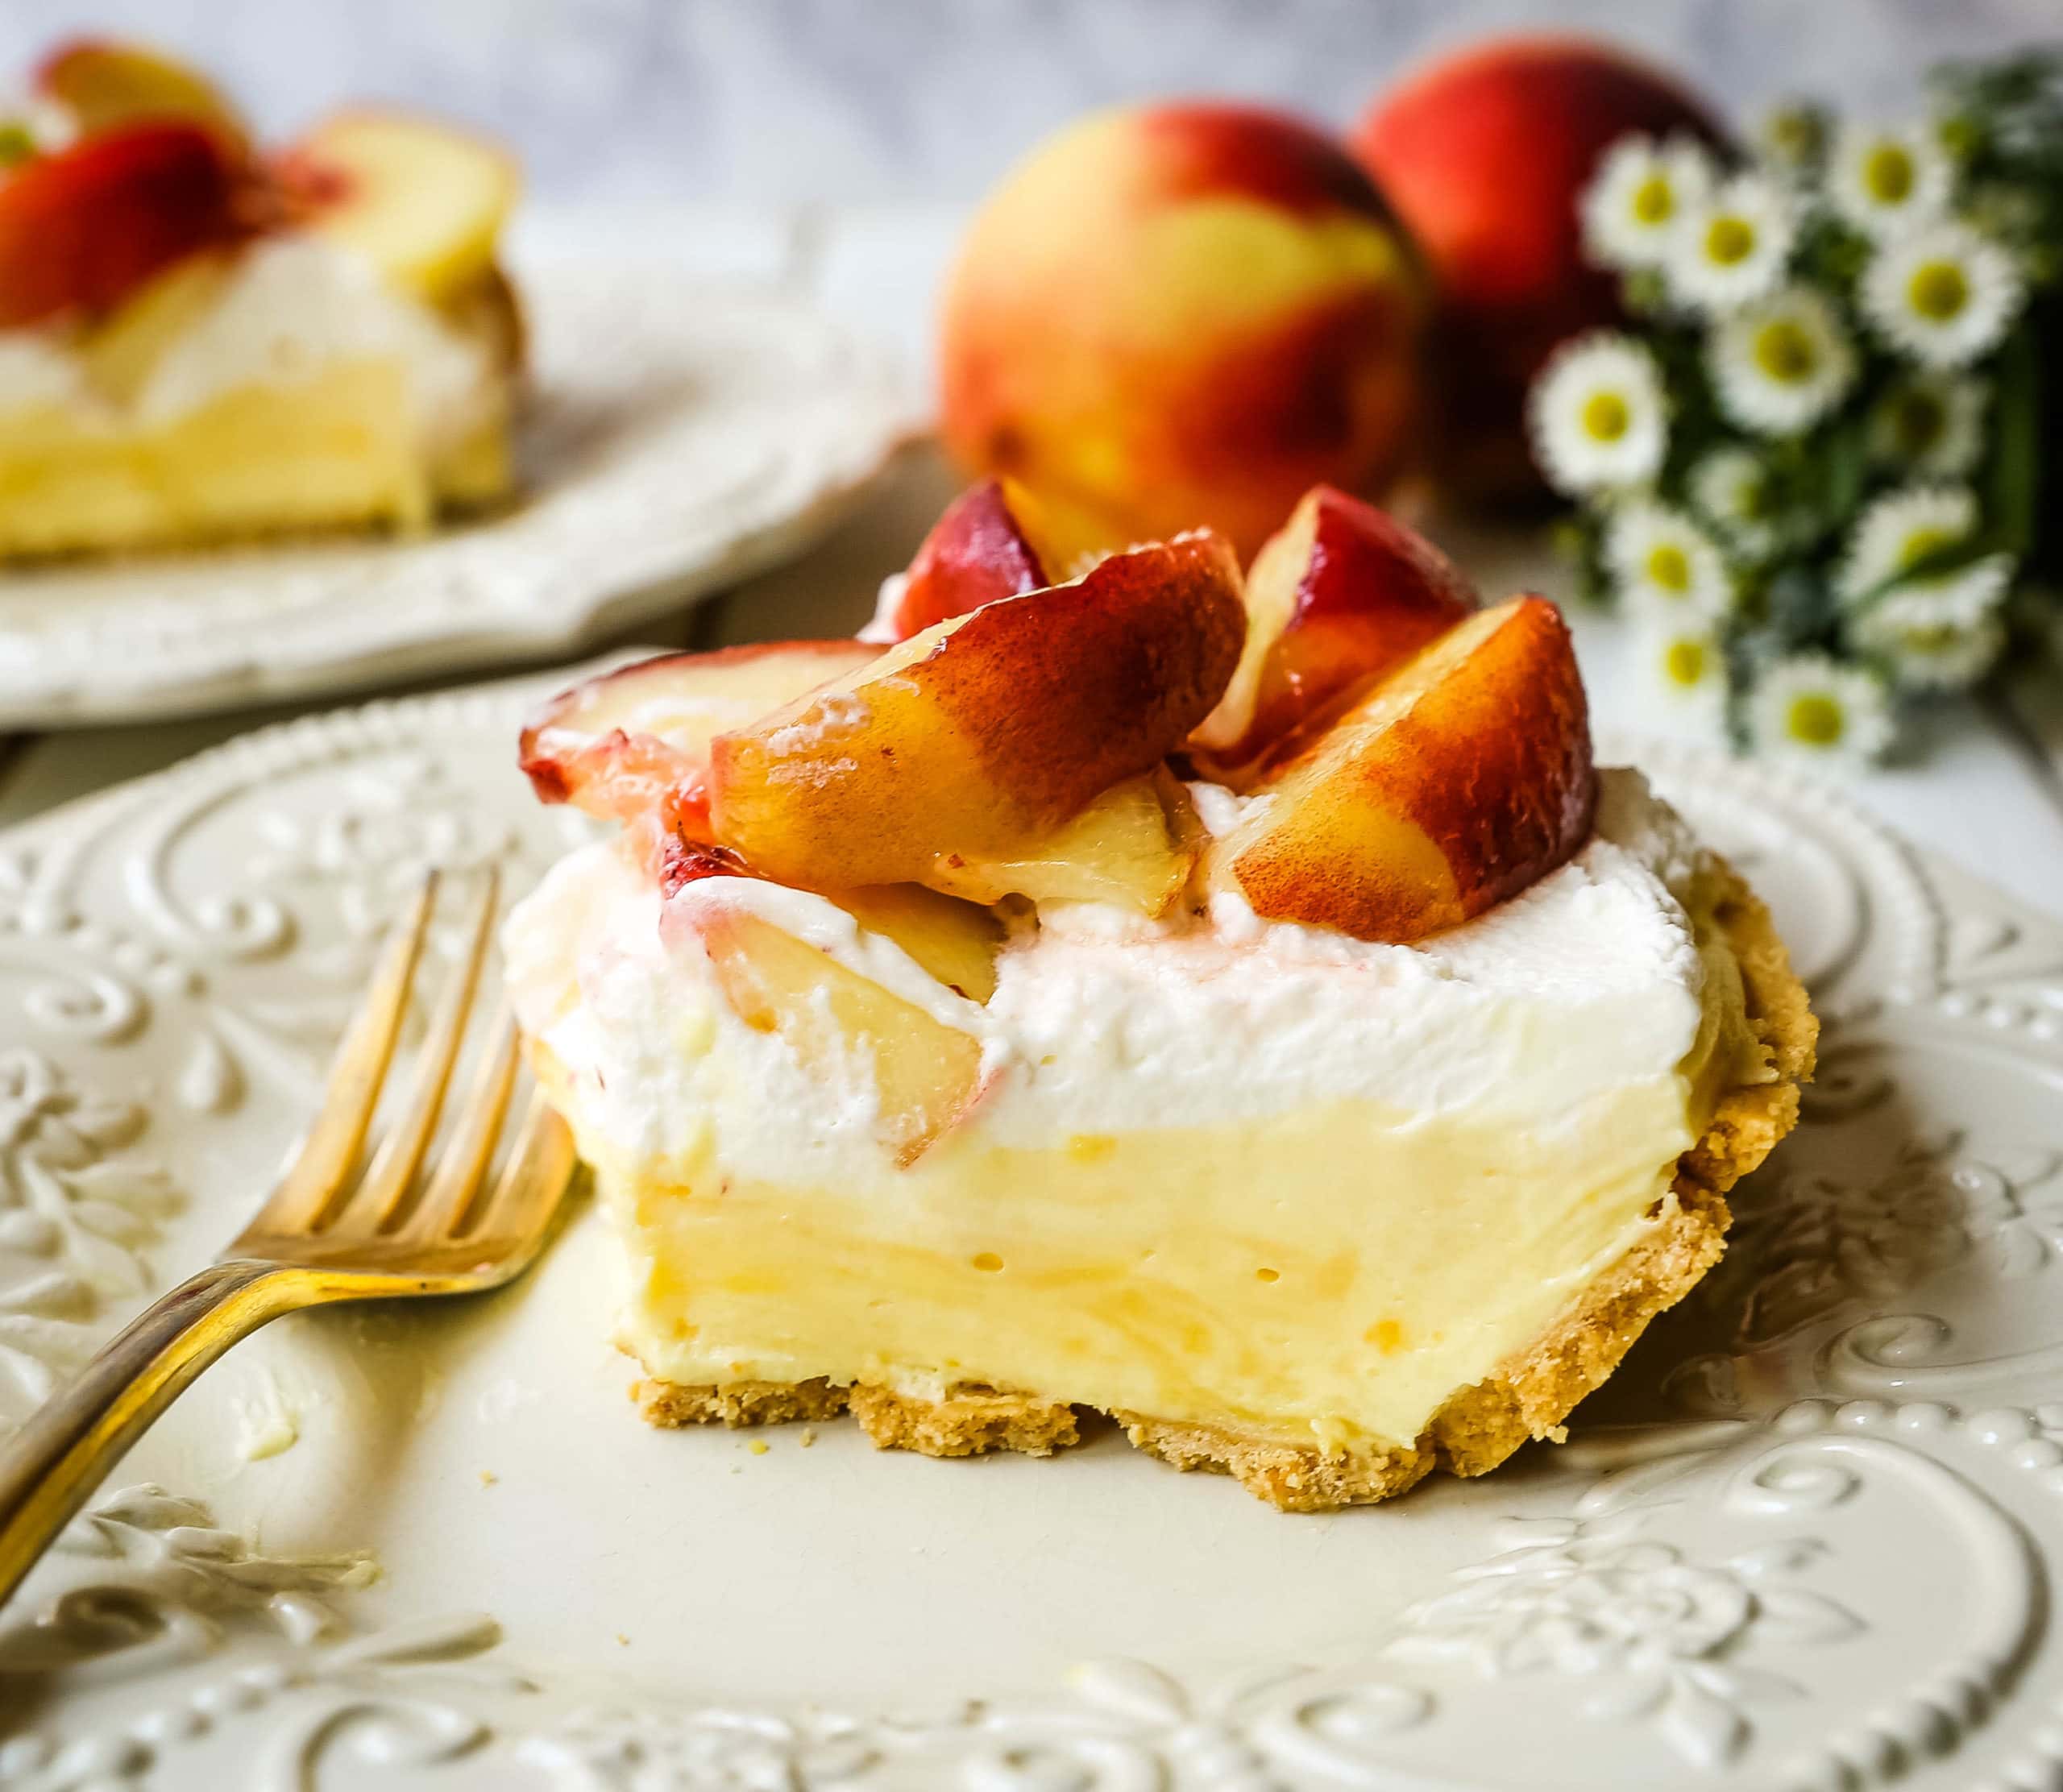 Peaches and Cream Pie. A quick and easy no-bake creamy peach pie with a buttery graham cracker crust, a sweet custard filling, fresh whipped cream, and sliced peaches.  www.modernhoney.com #pie #nobakedessert #nobakepie #peachdessert #peaches #peach